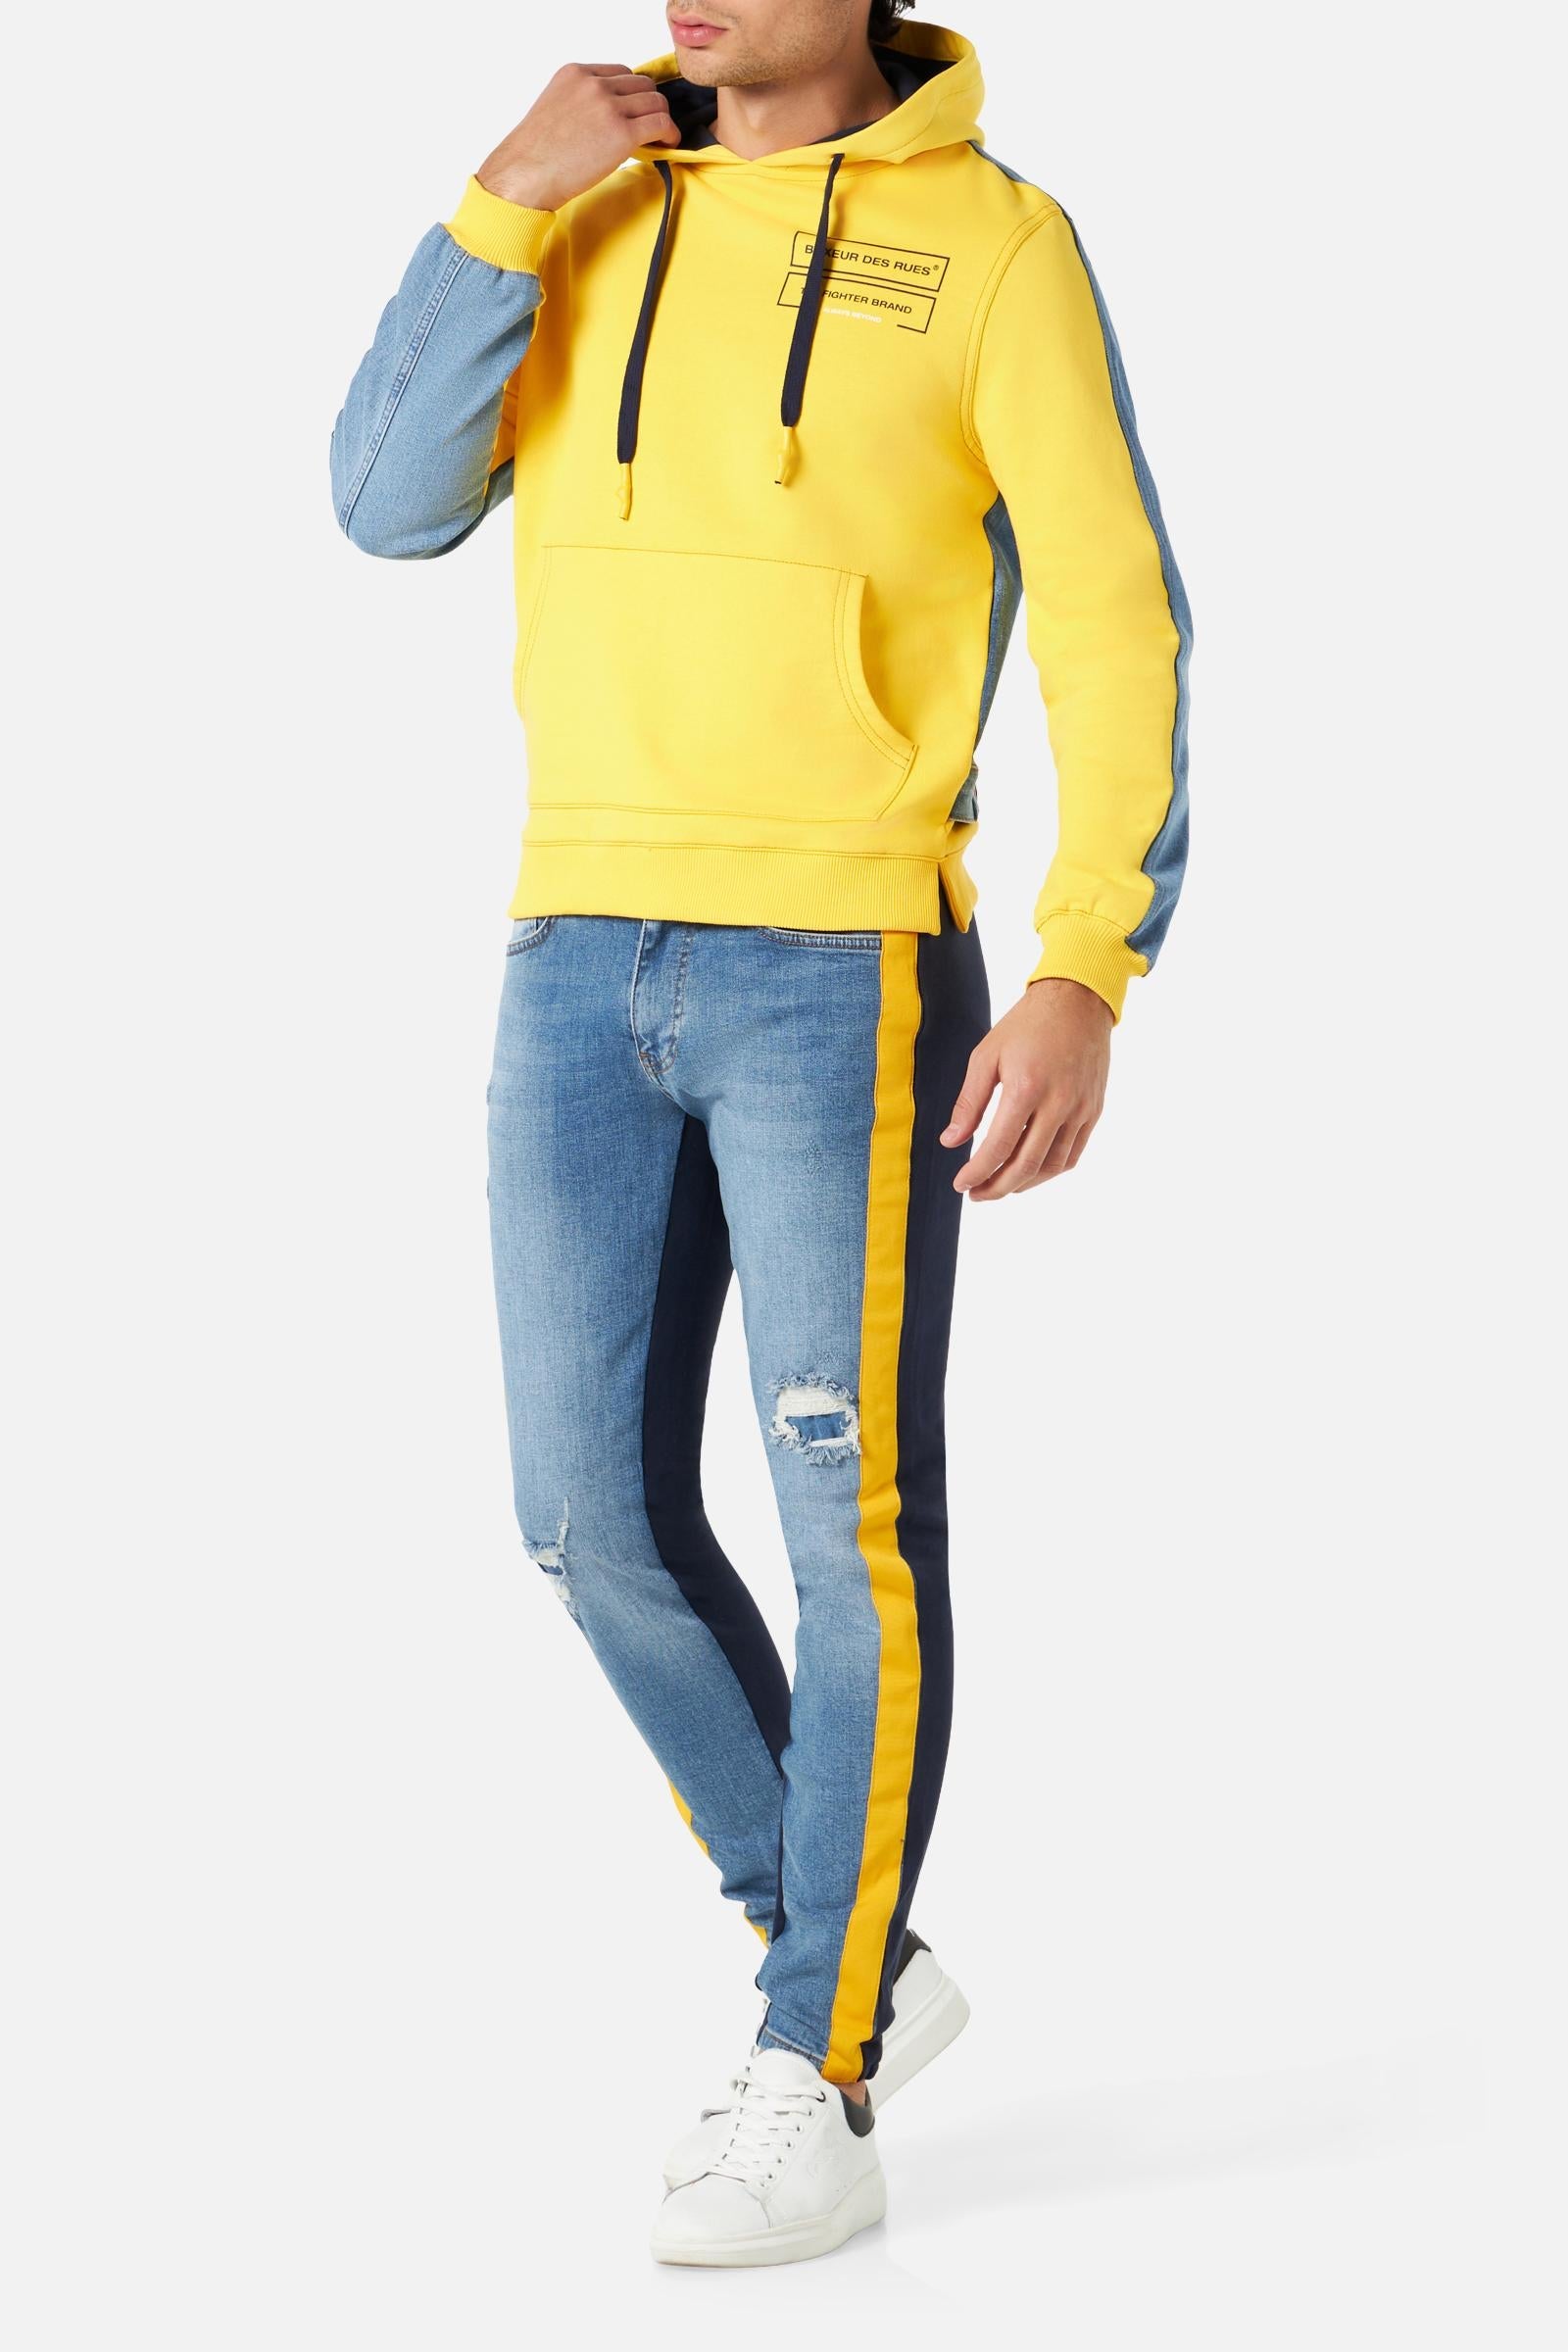 Mixed Fabric Hoodie in Yellow Kapuzenpullover Boxeur des Rues   